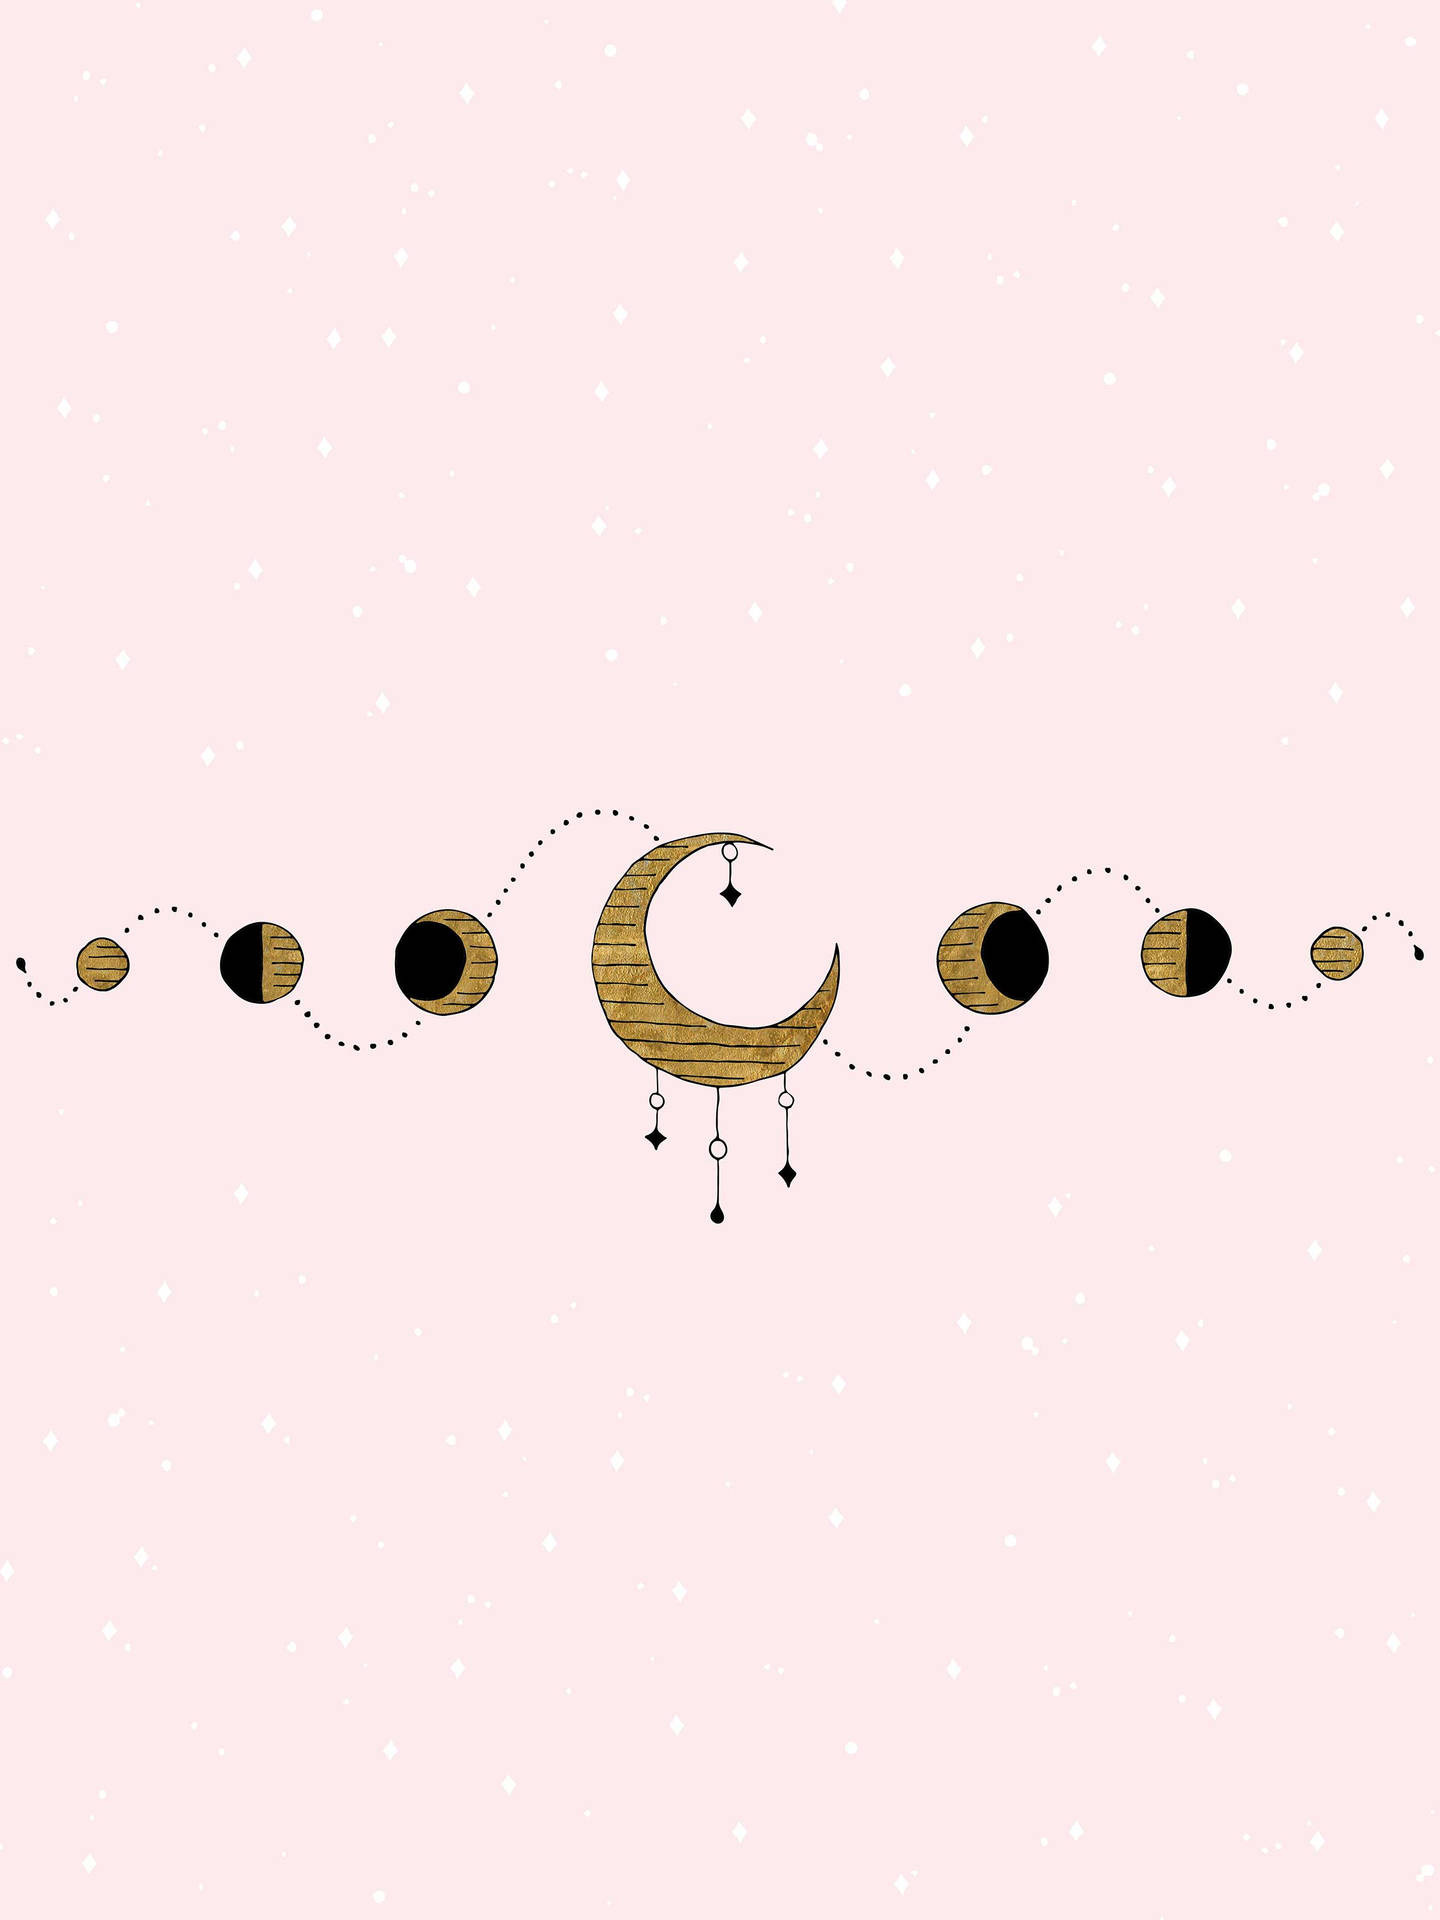 Aesthetic Moon Phases In Light Pink Wallpaper